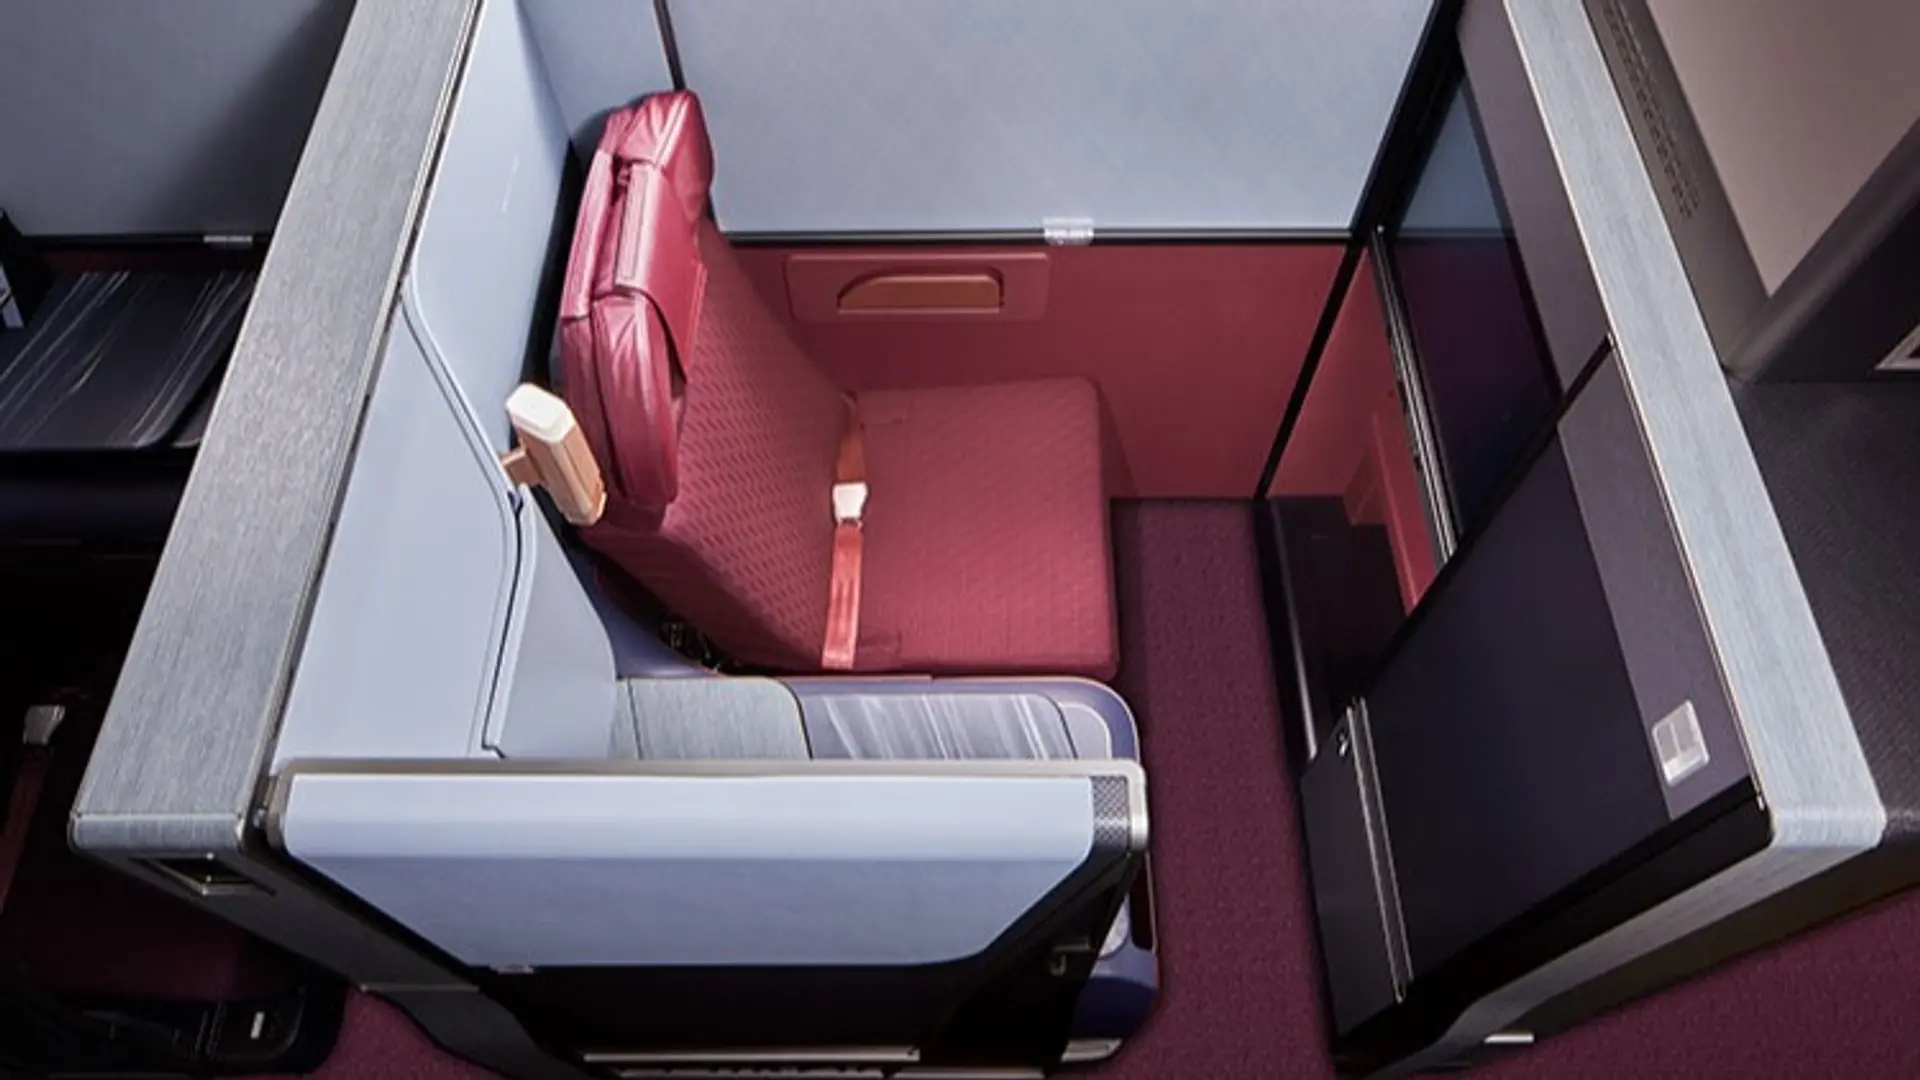 Airlines News - JAL unveils new A350 Business Class & First Class 